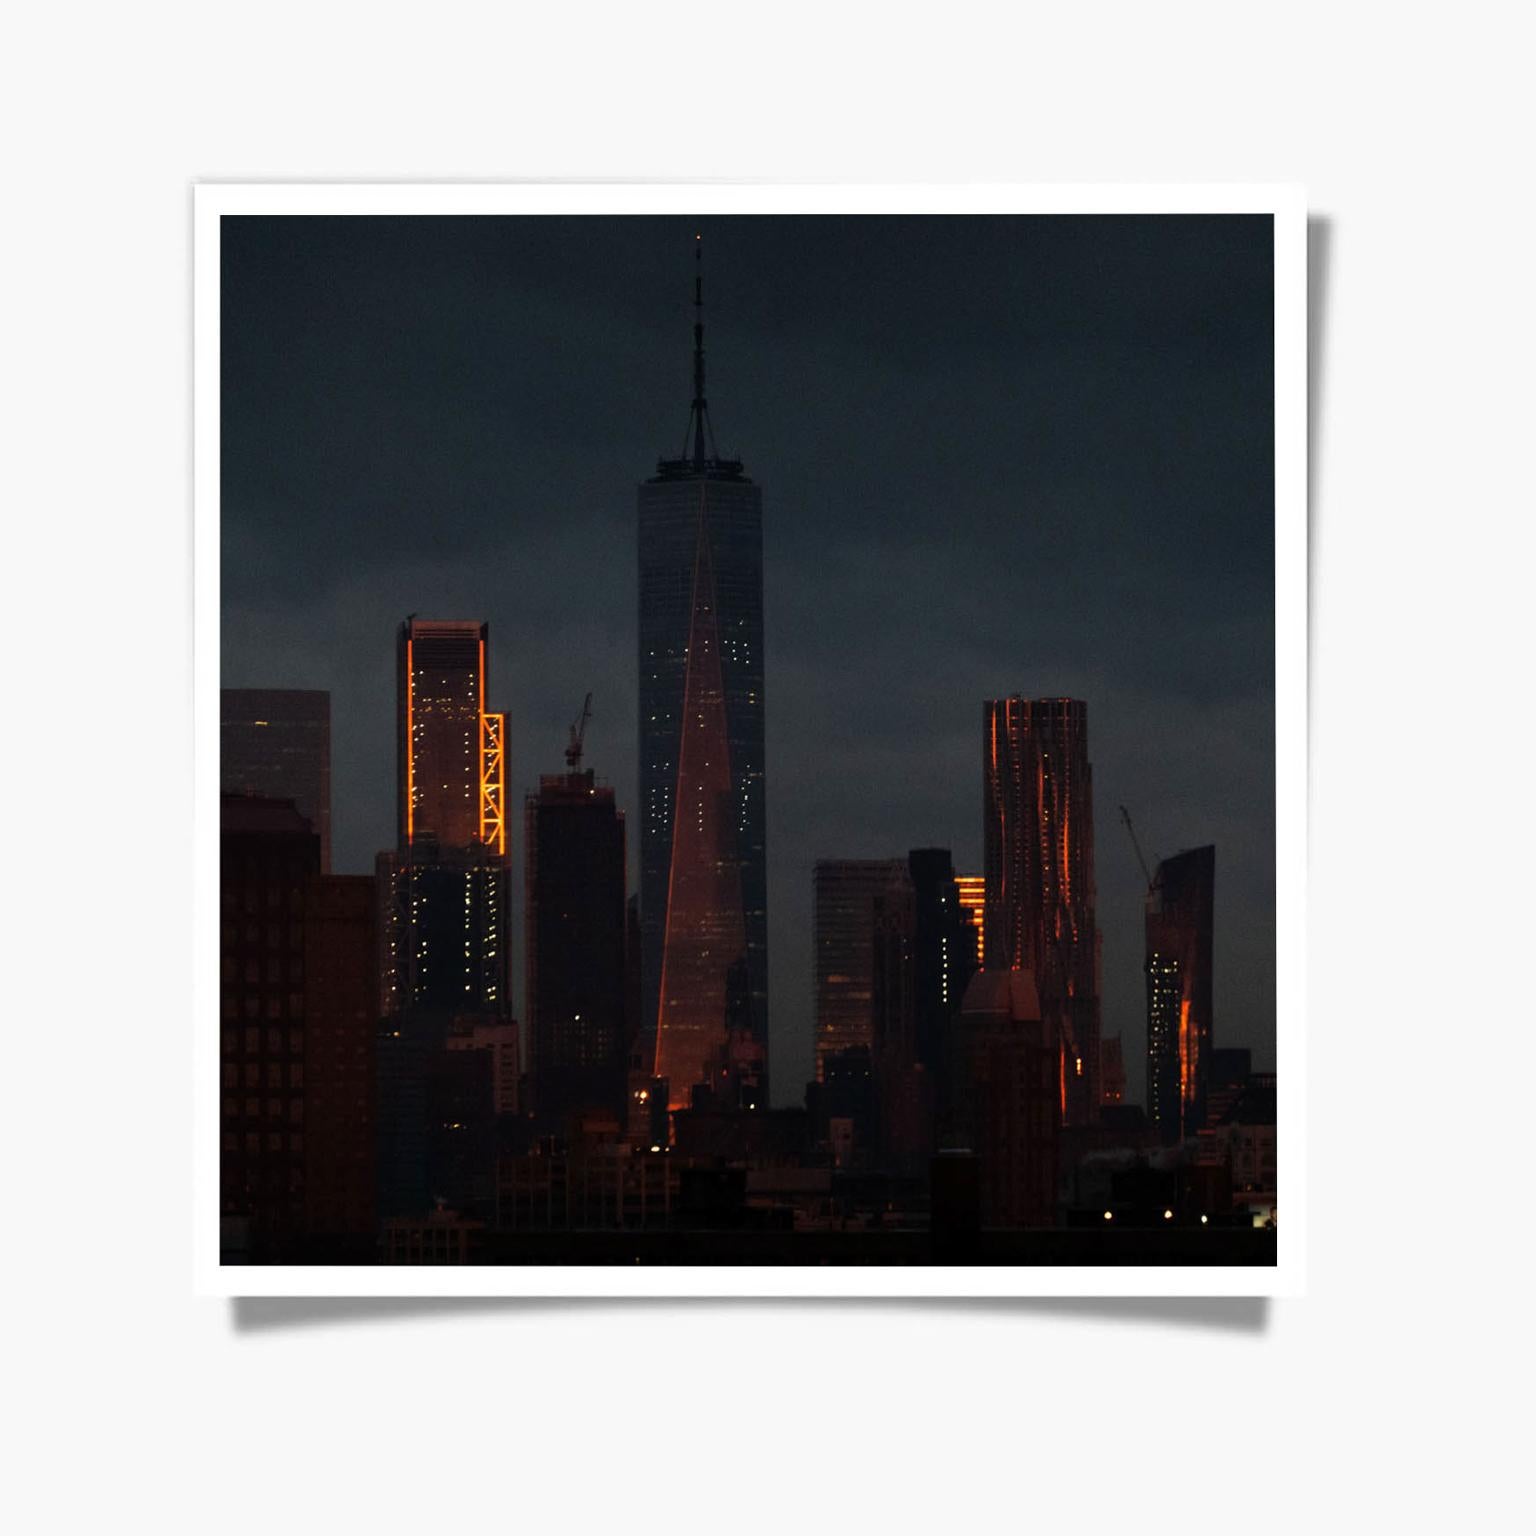 Untitled (NYC no. 20) - Photograph by Brian Finke